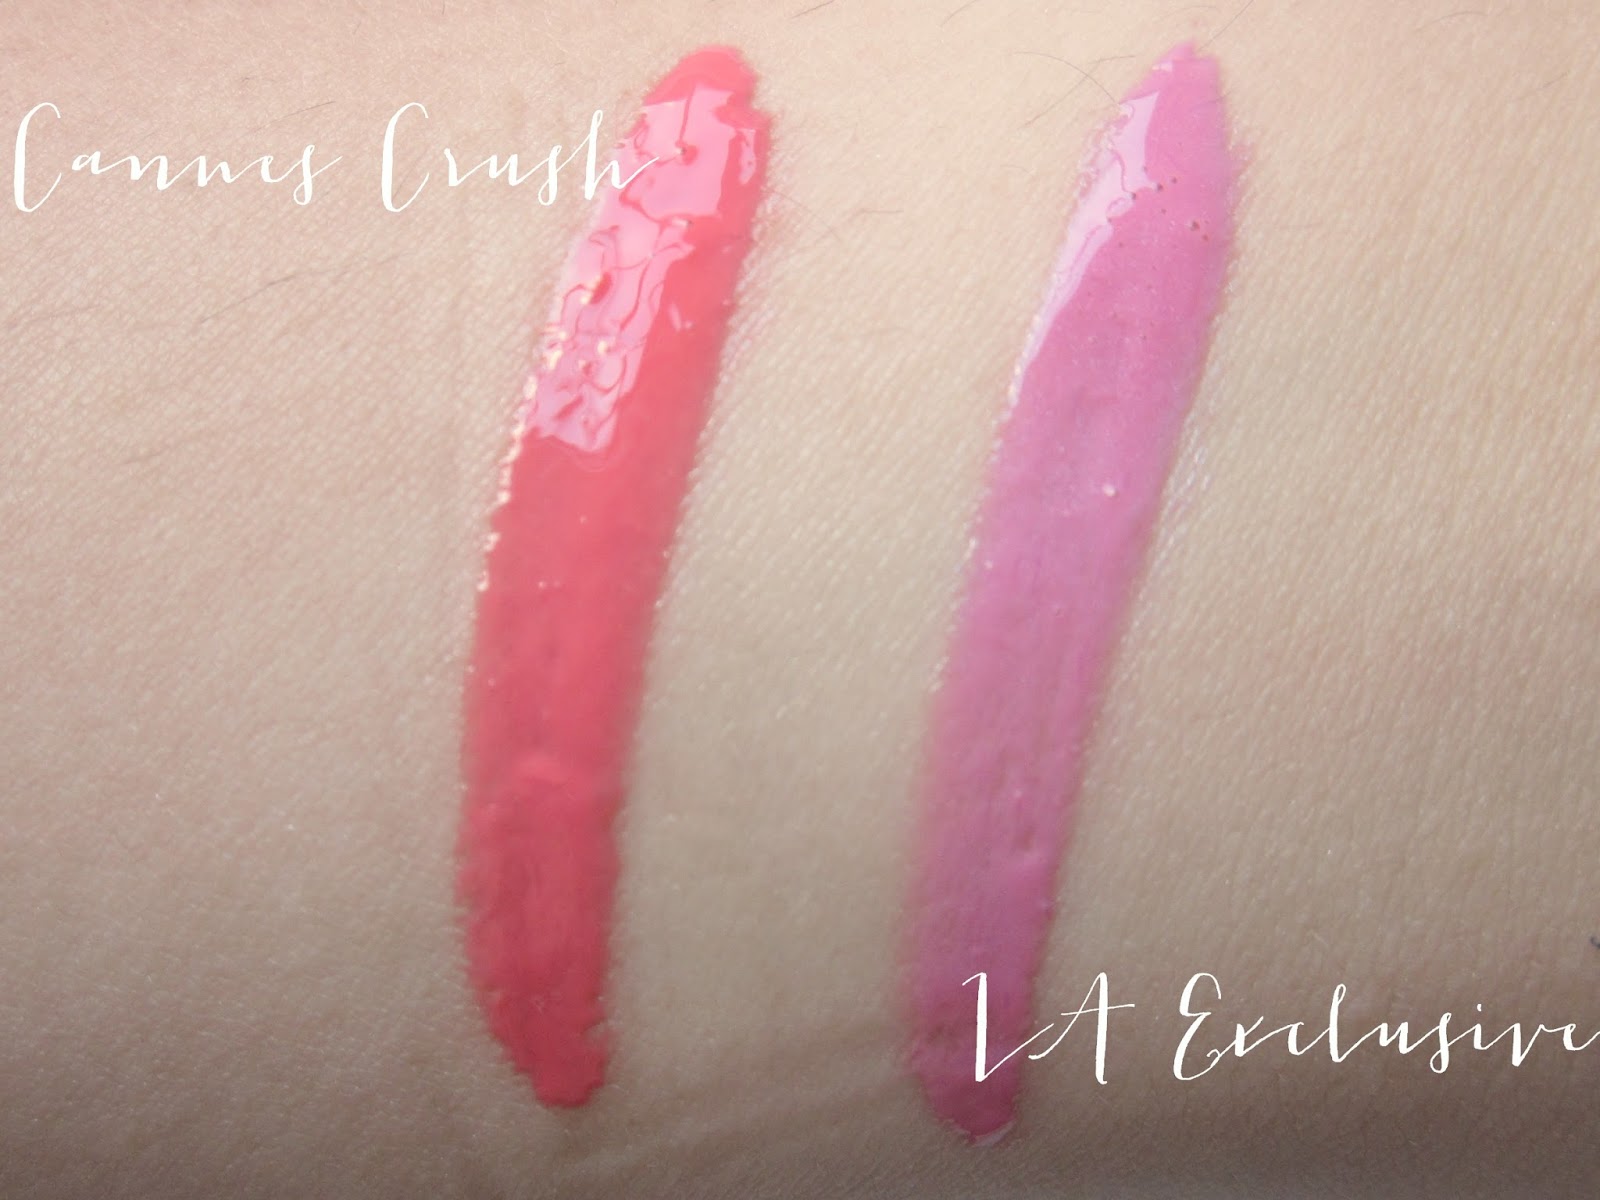 revlon colorstay moisture stain swatches in cannes crush and la exclusive